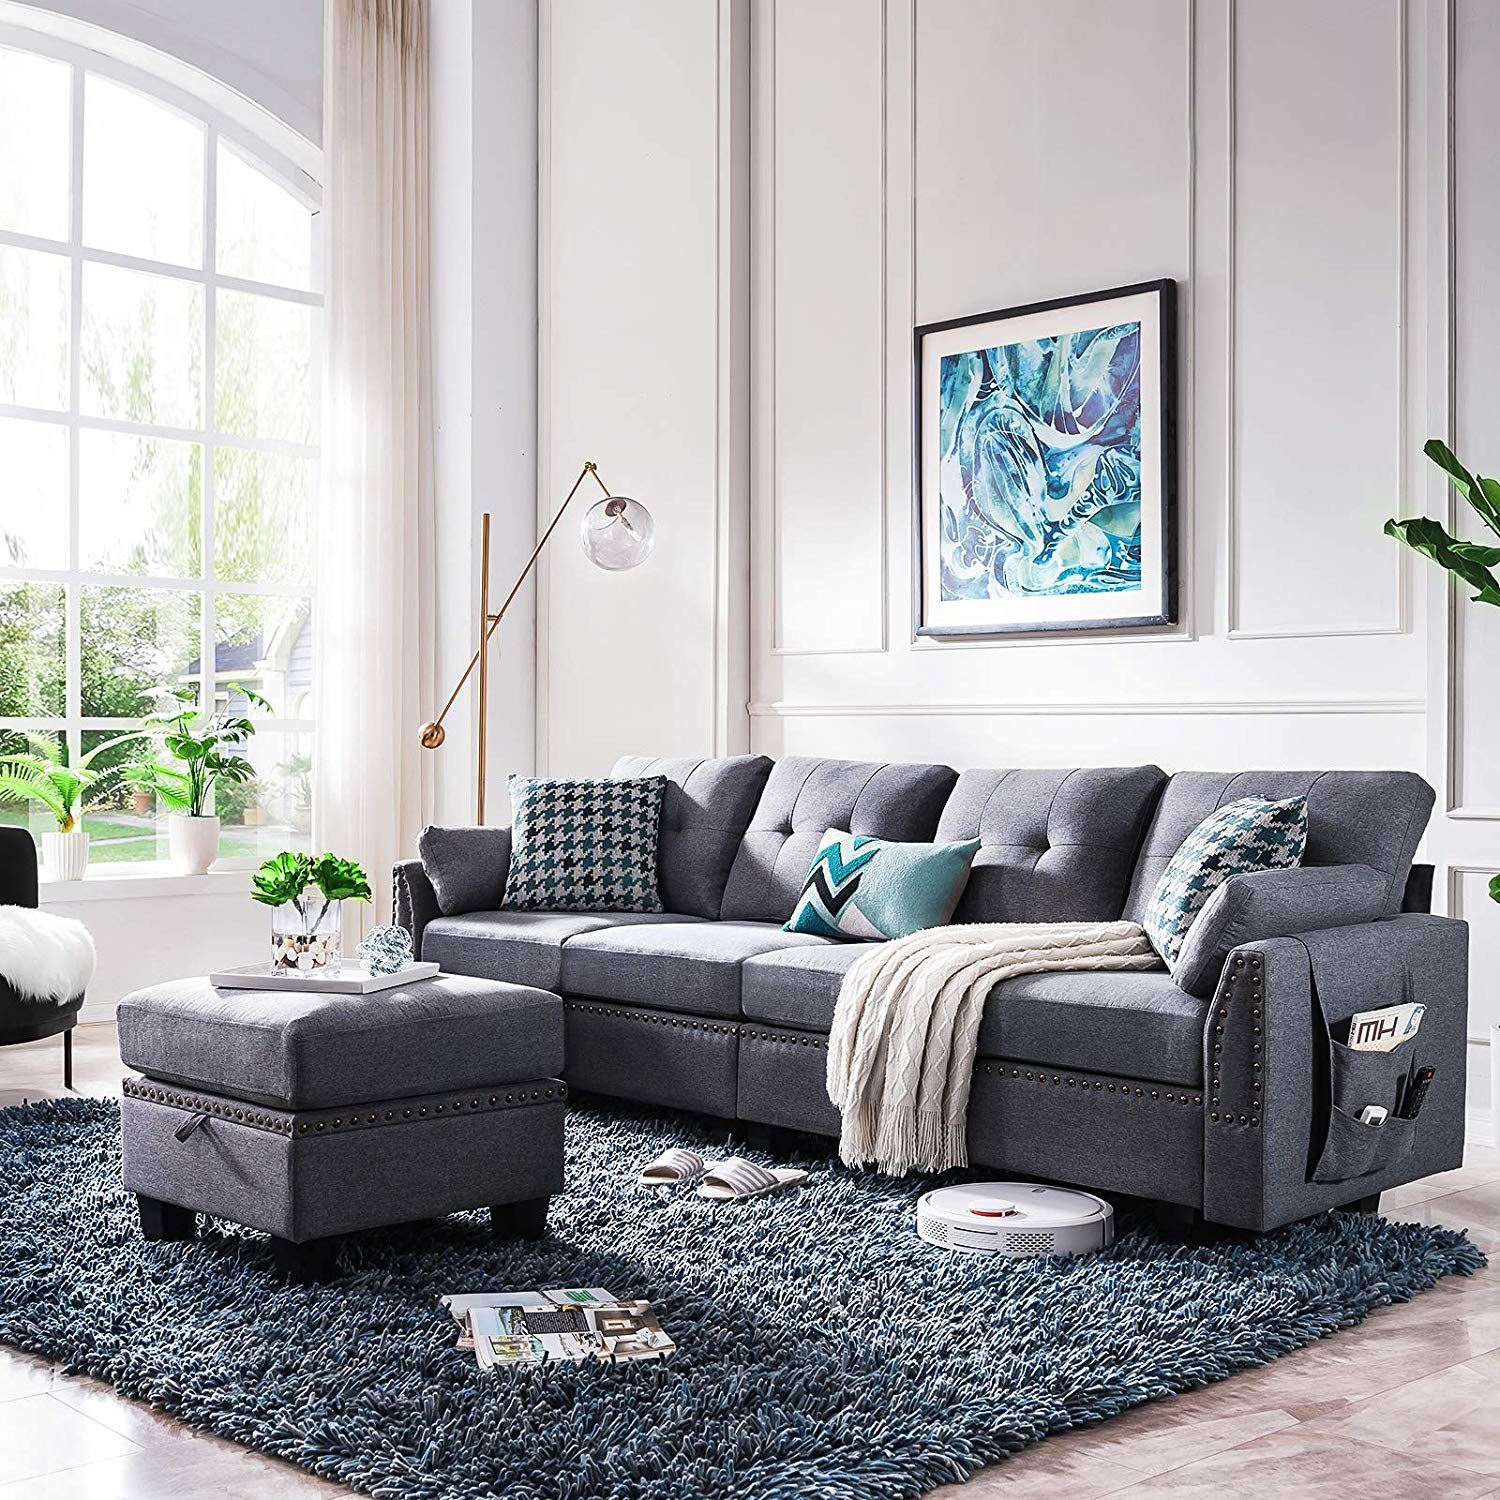 Honbay Reversible Sectional Sofa Couch For Living Room | Stylebywood Within Reversible Sectional Sofas (View 9 of 15)